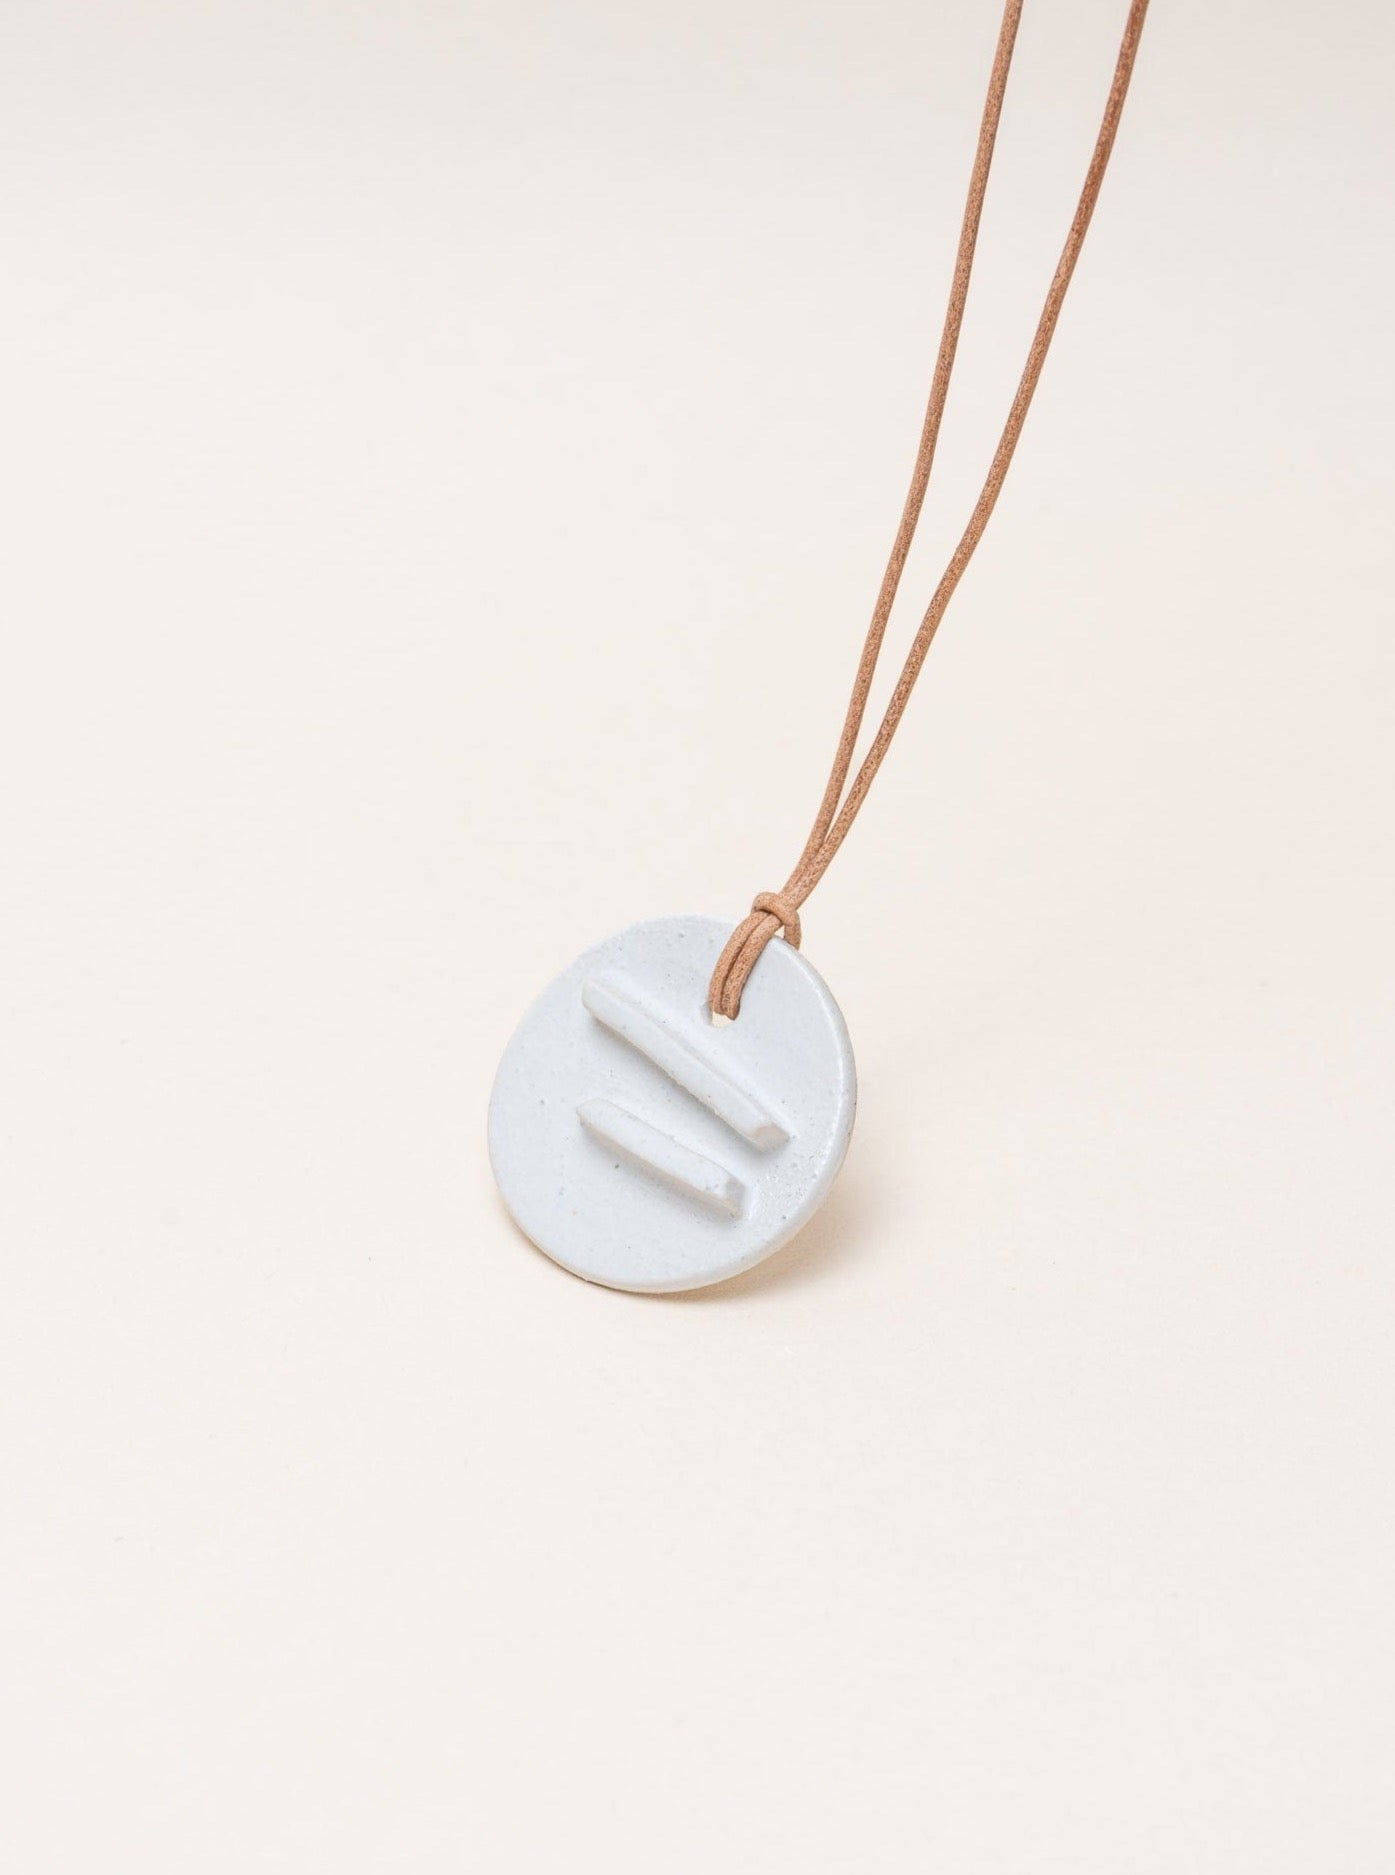 A Mini Edena Necklace with a white circle on a brown leather cord.